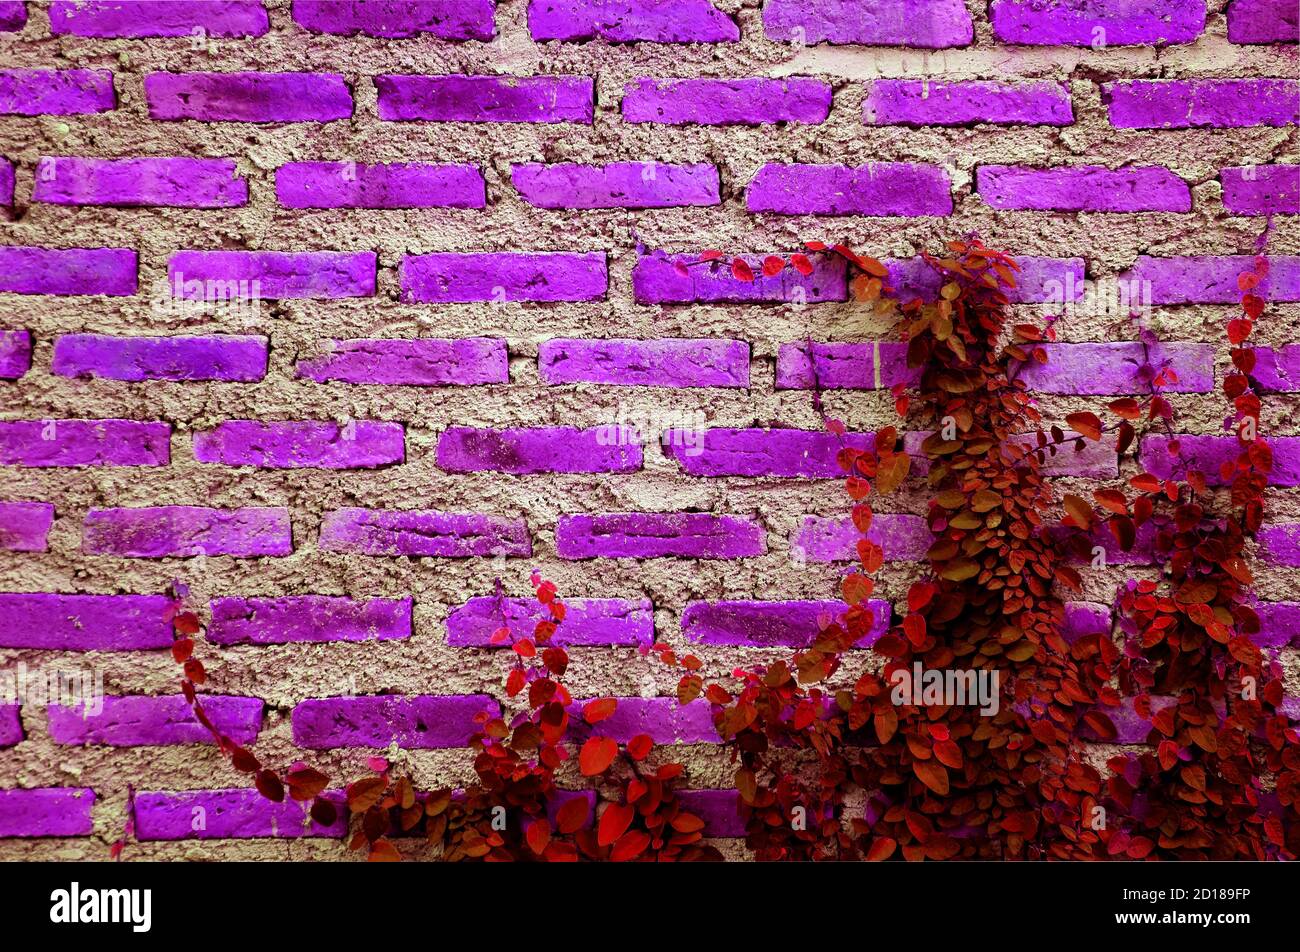 Surreal pop art purple pink and red colored brick wall with growing plant  Stock Photo - Alamy